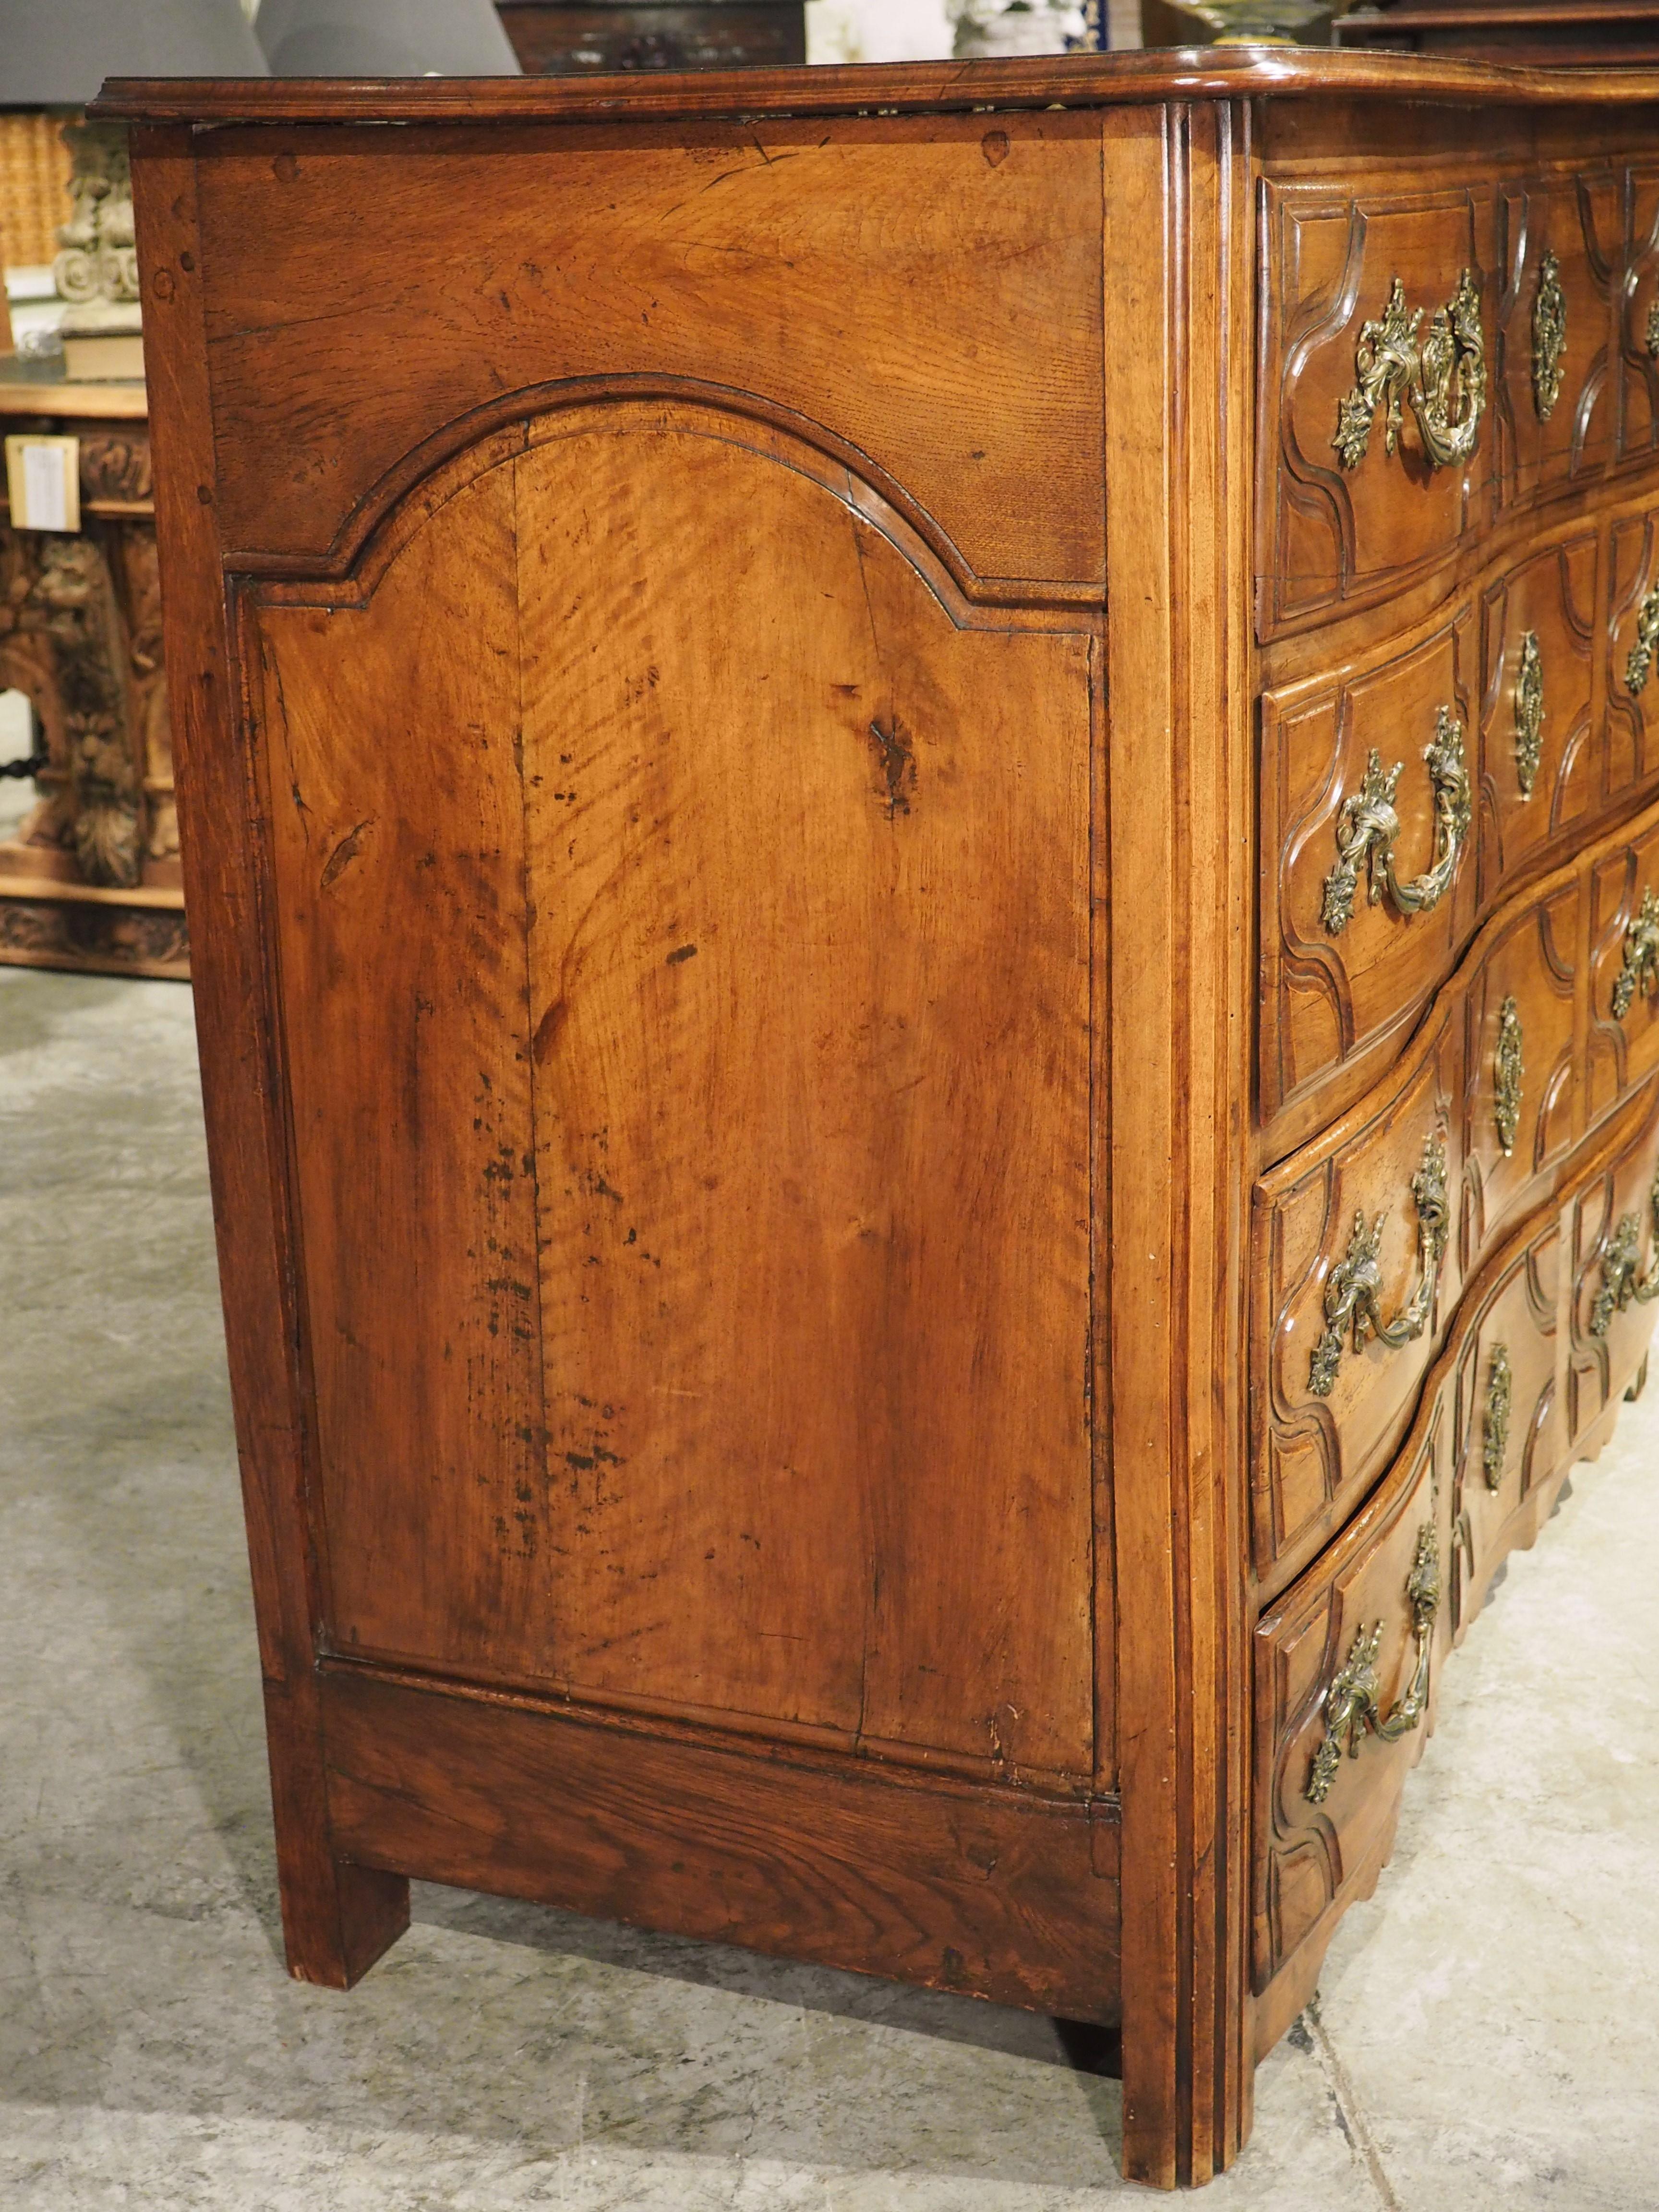 Rare 18th Century Walnut Wood Commode from the Île-de-France Region 4